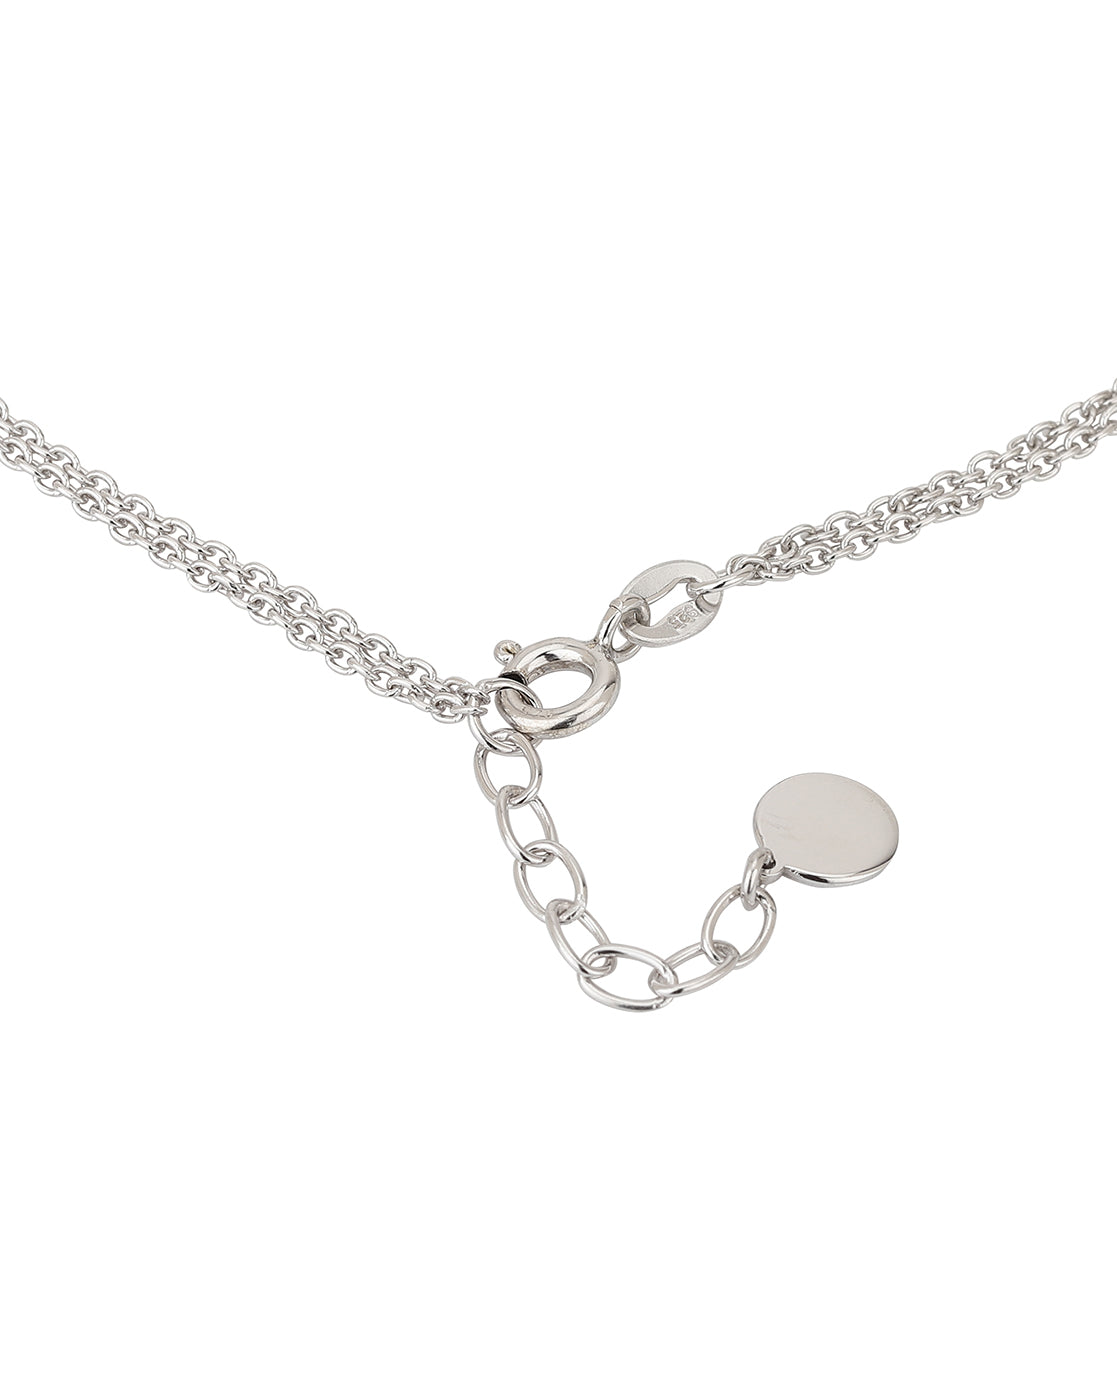 Carlton London 925 Sterling Silver Rhodium Plated Silver Toned Arow Shape Anklet For Women